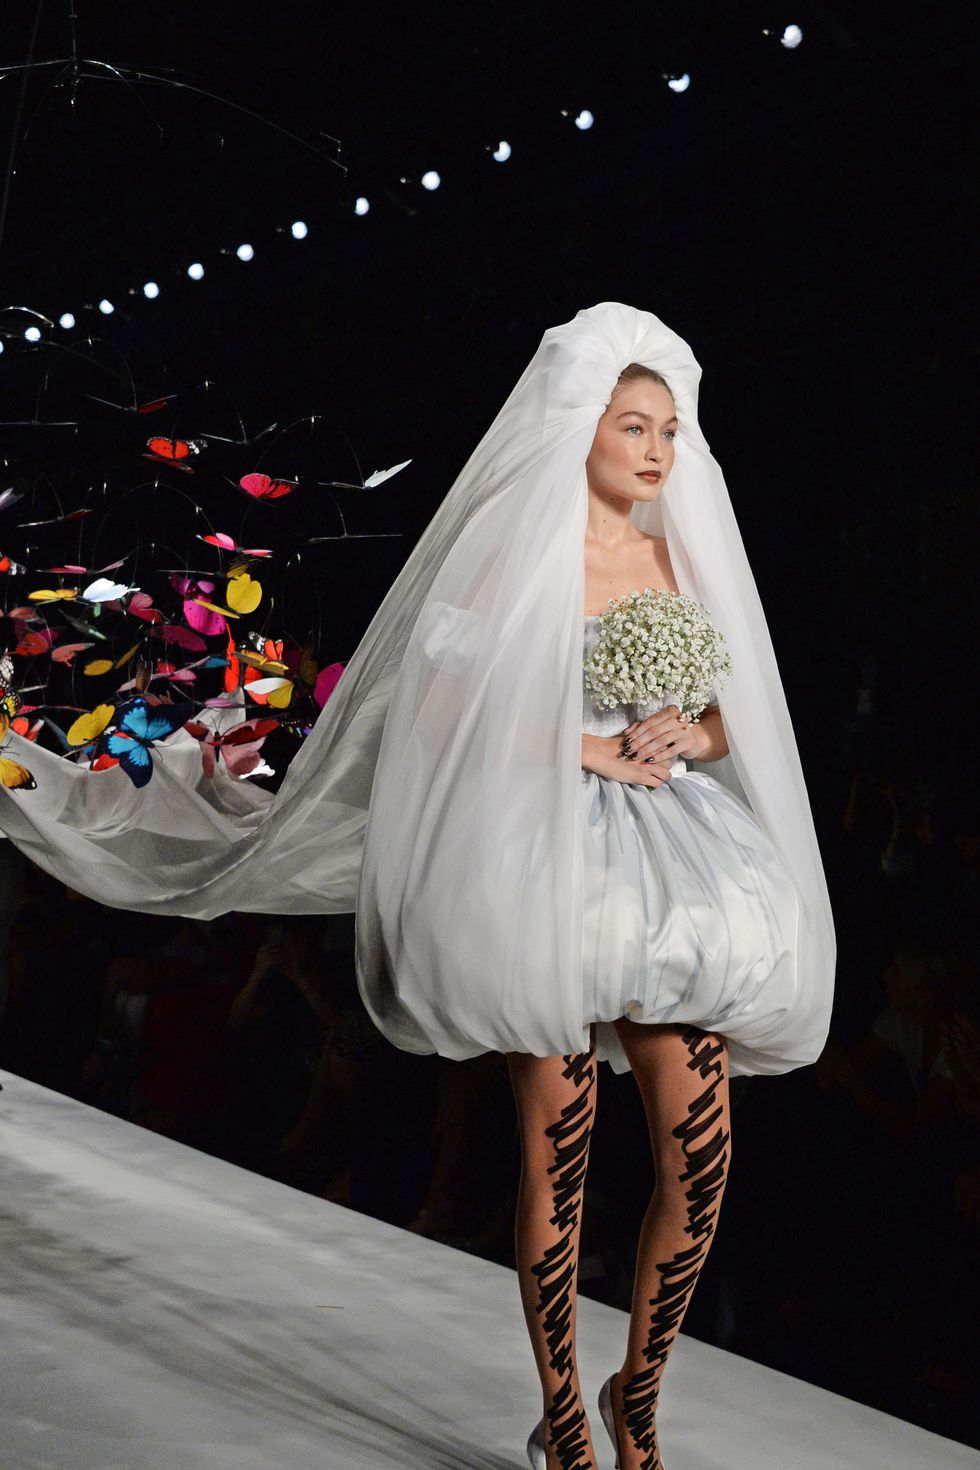 Gigi Hadid's Bizarre Wedding Dress Will Leave You With So Many Questions